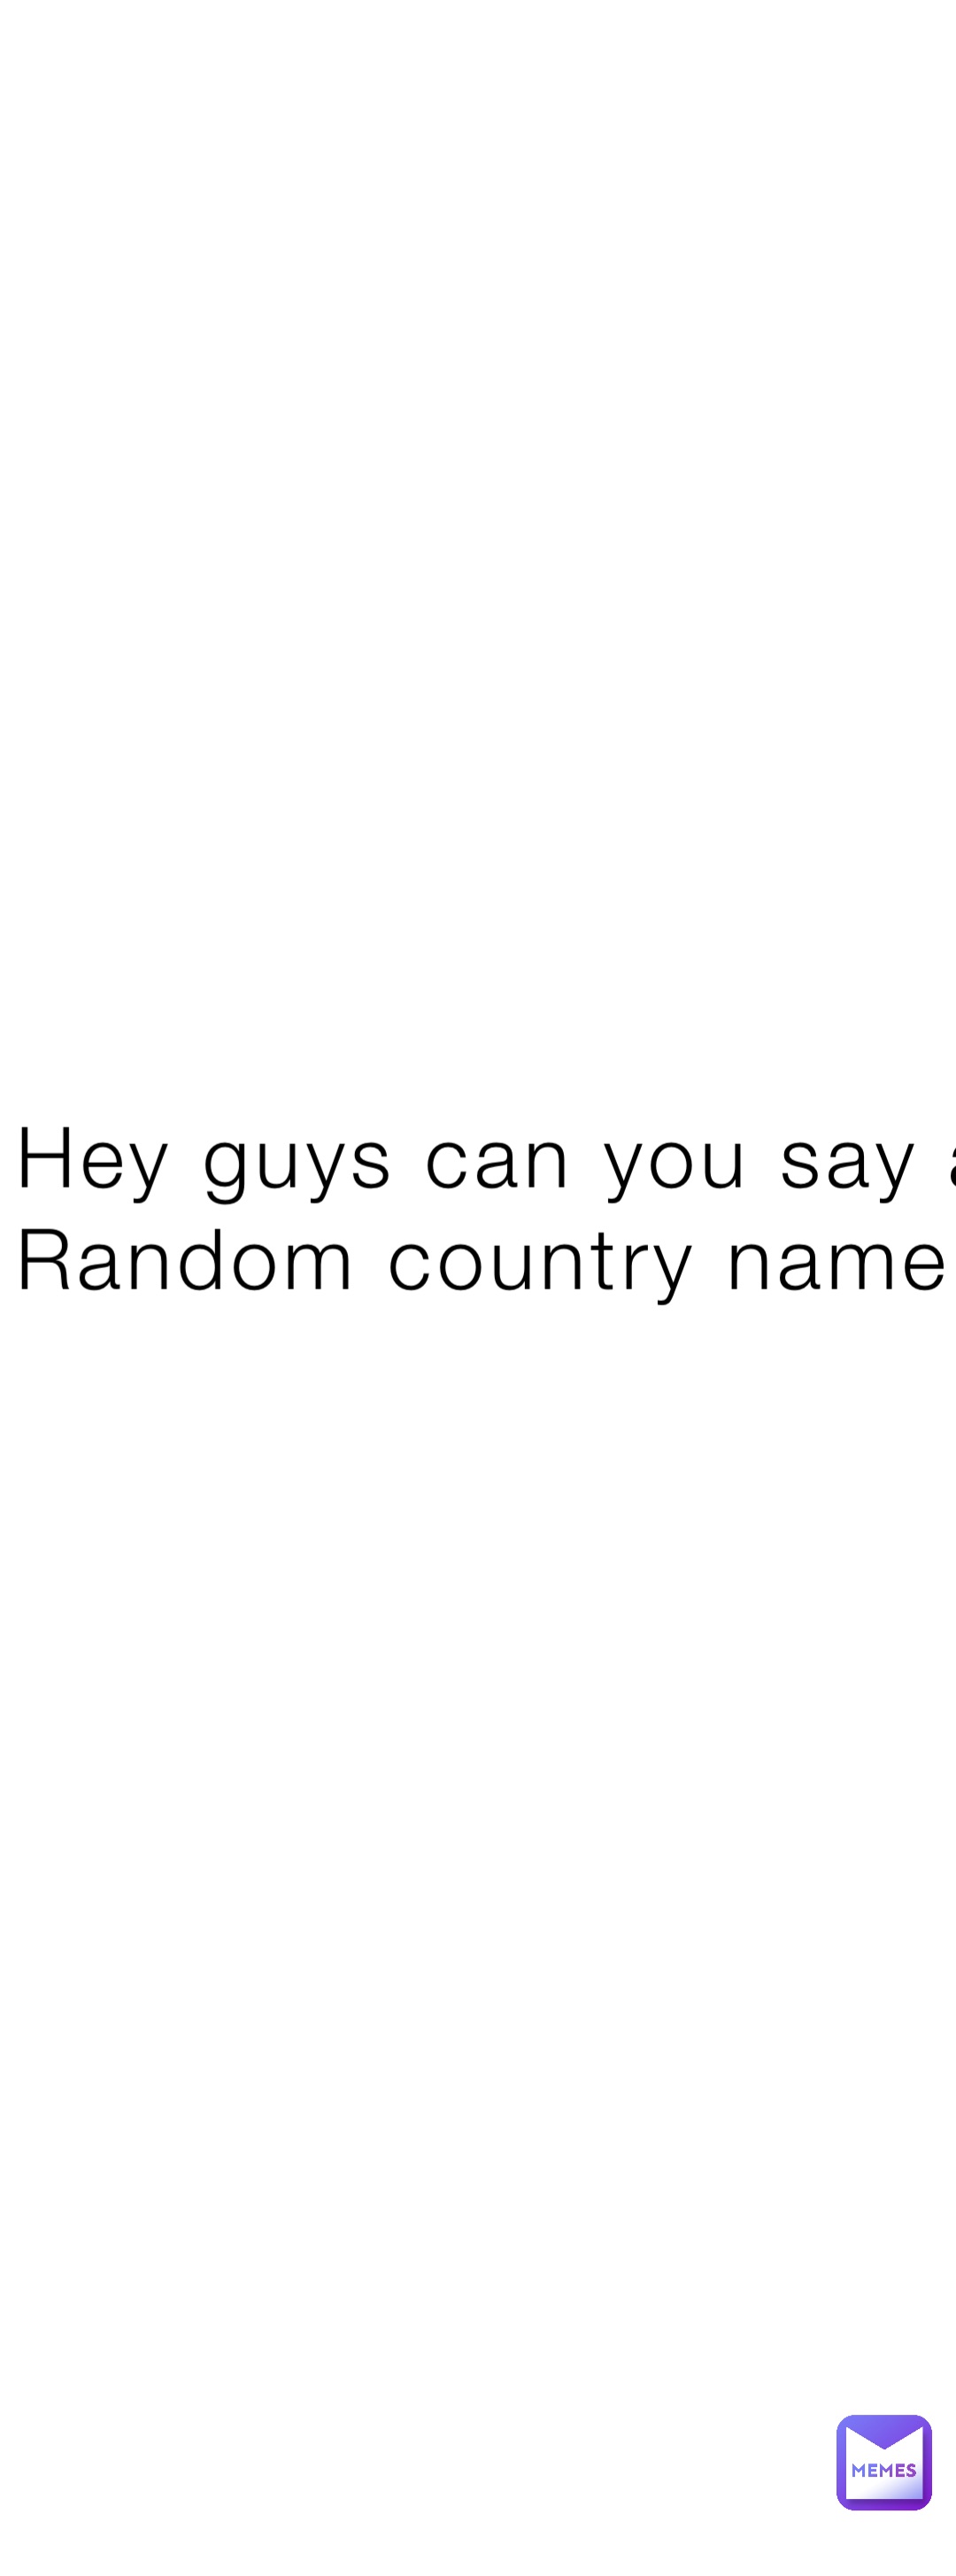 Hey guys can you say a Random country name